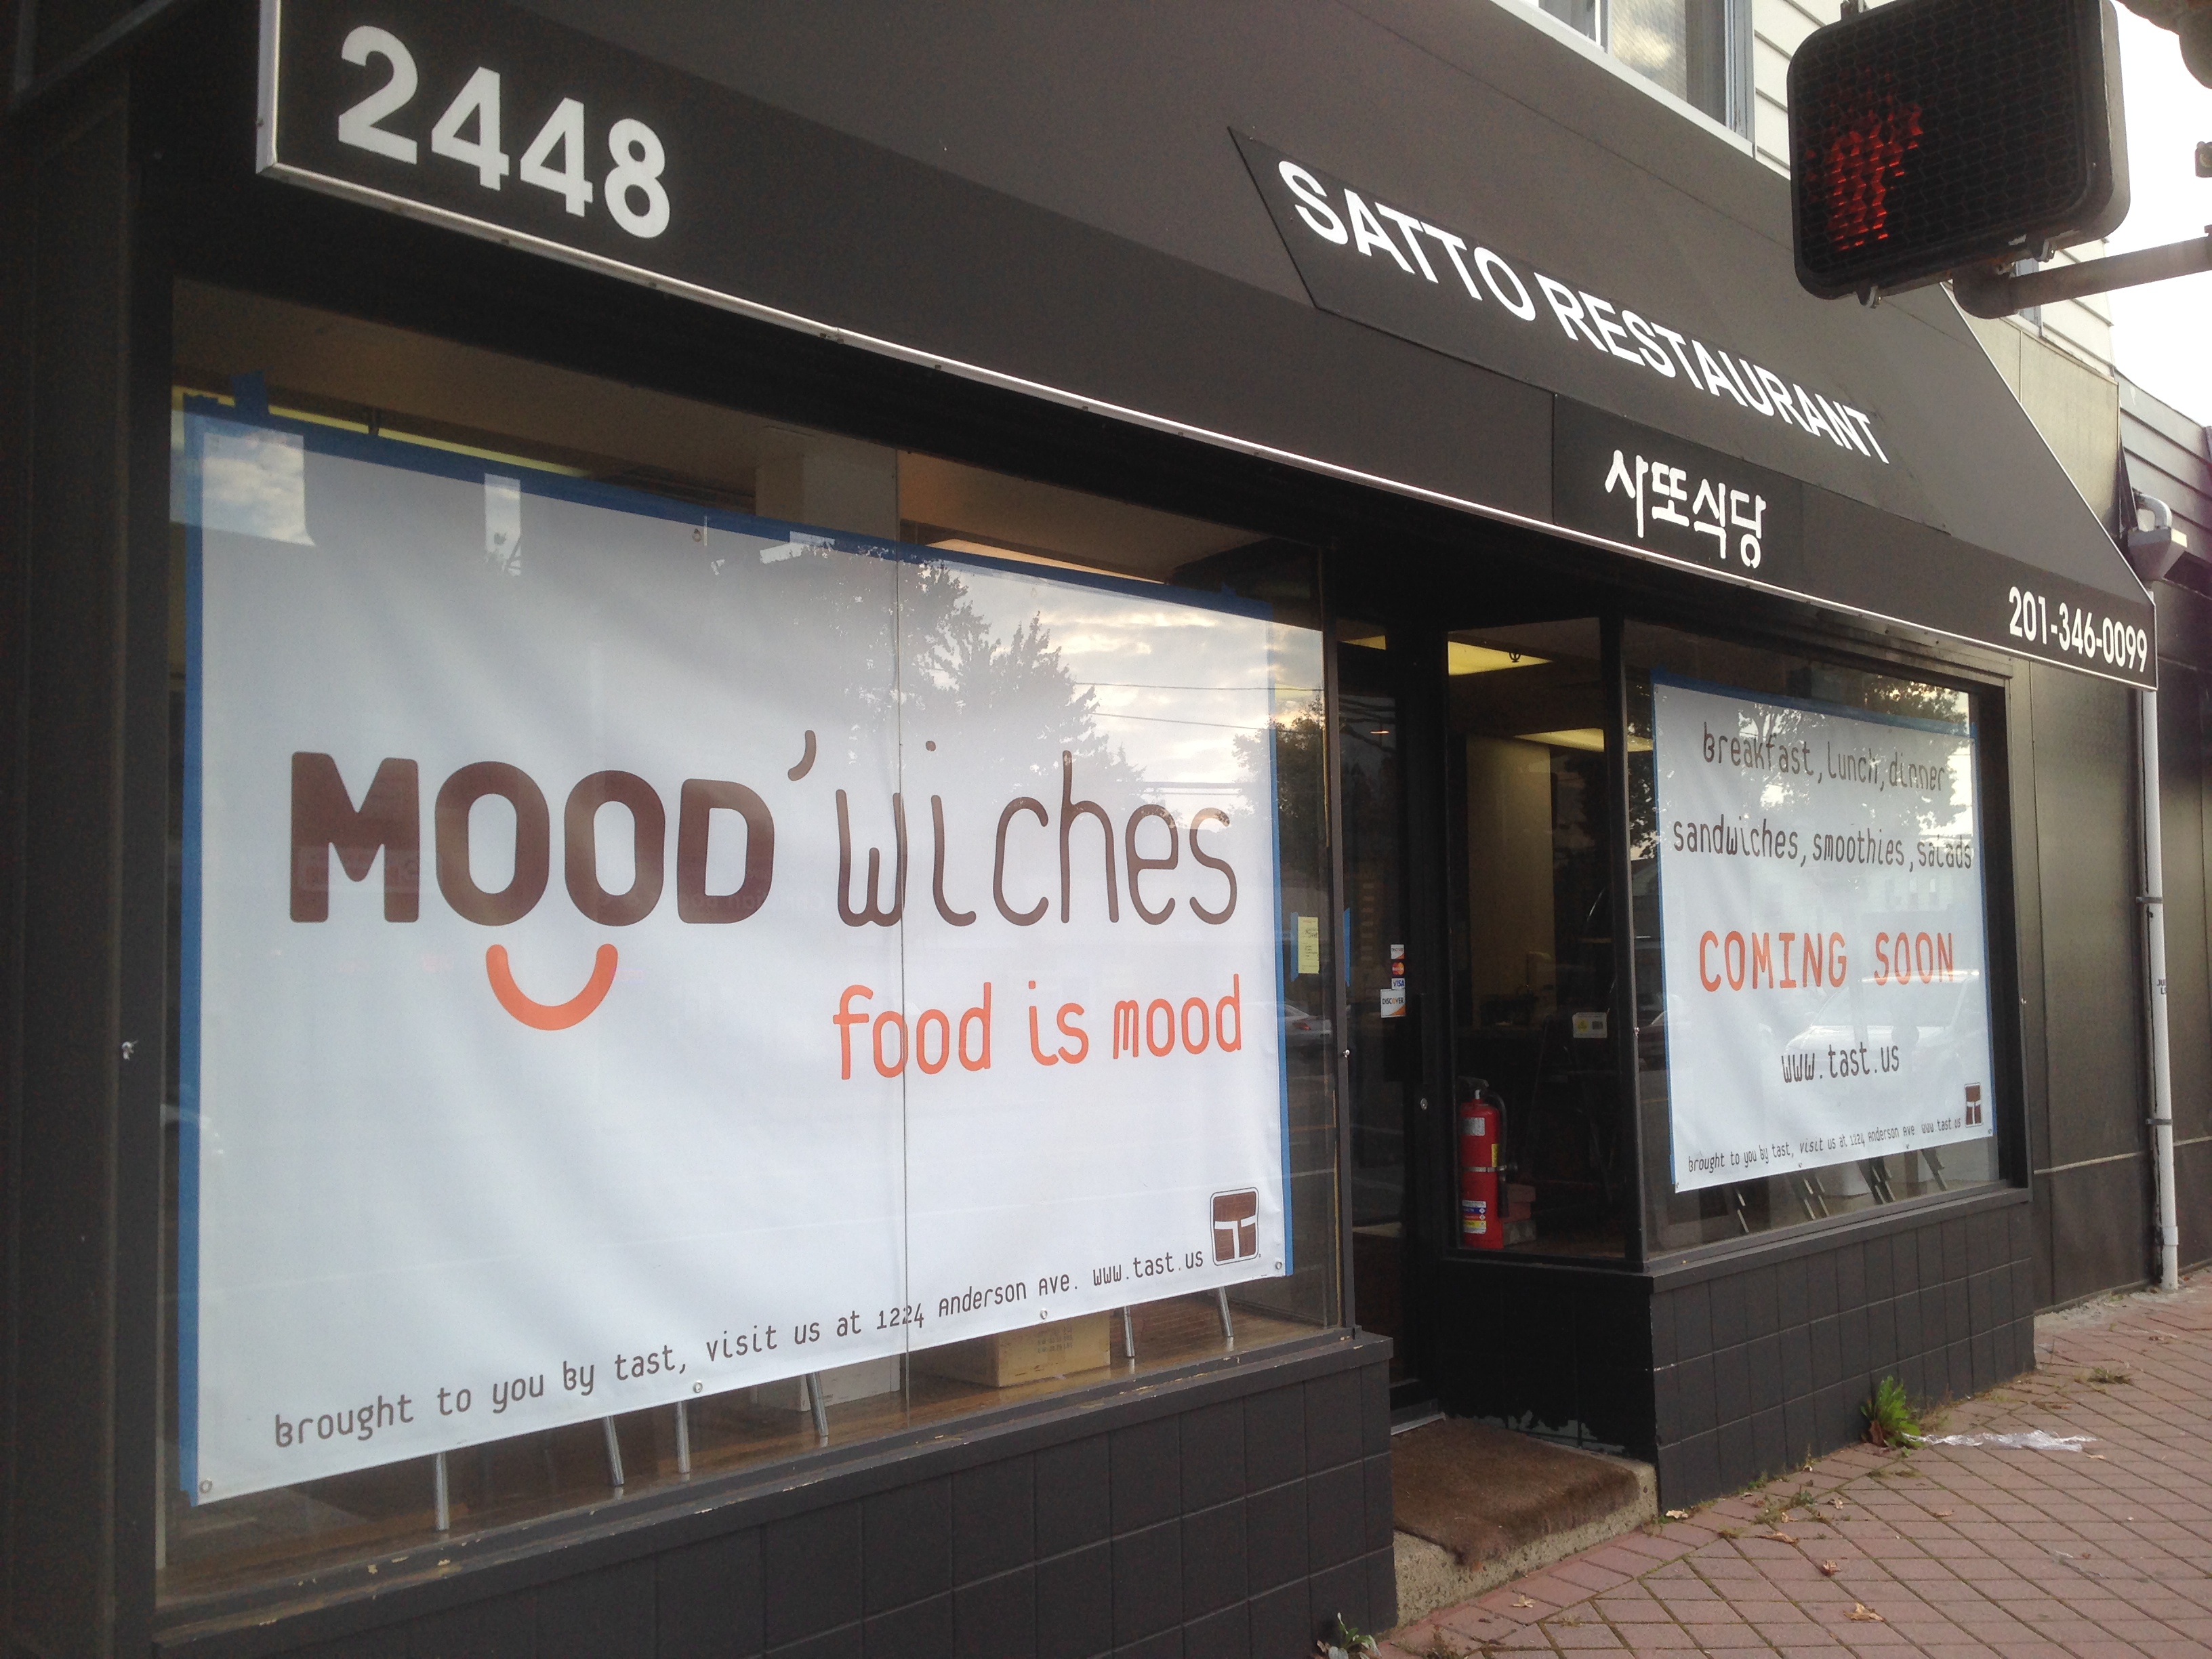 Upcoming mood 'wiches (and tast) in Fort Lee